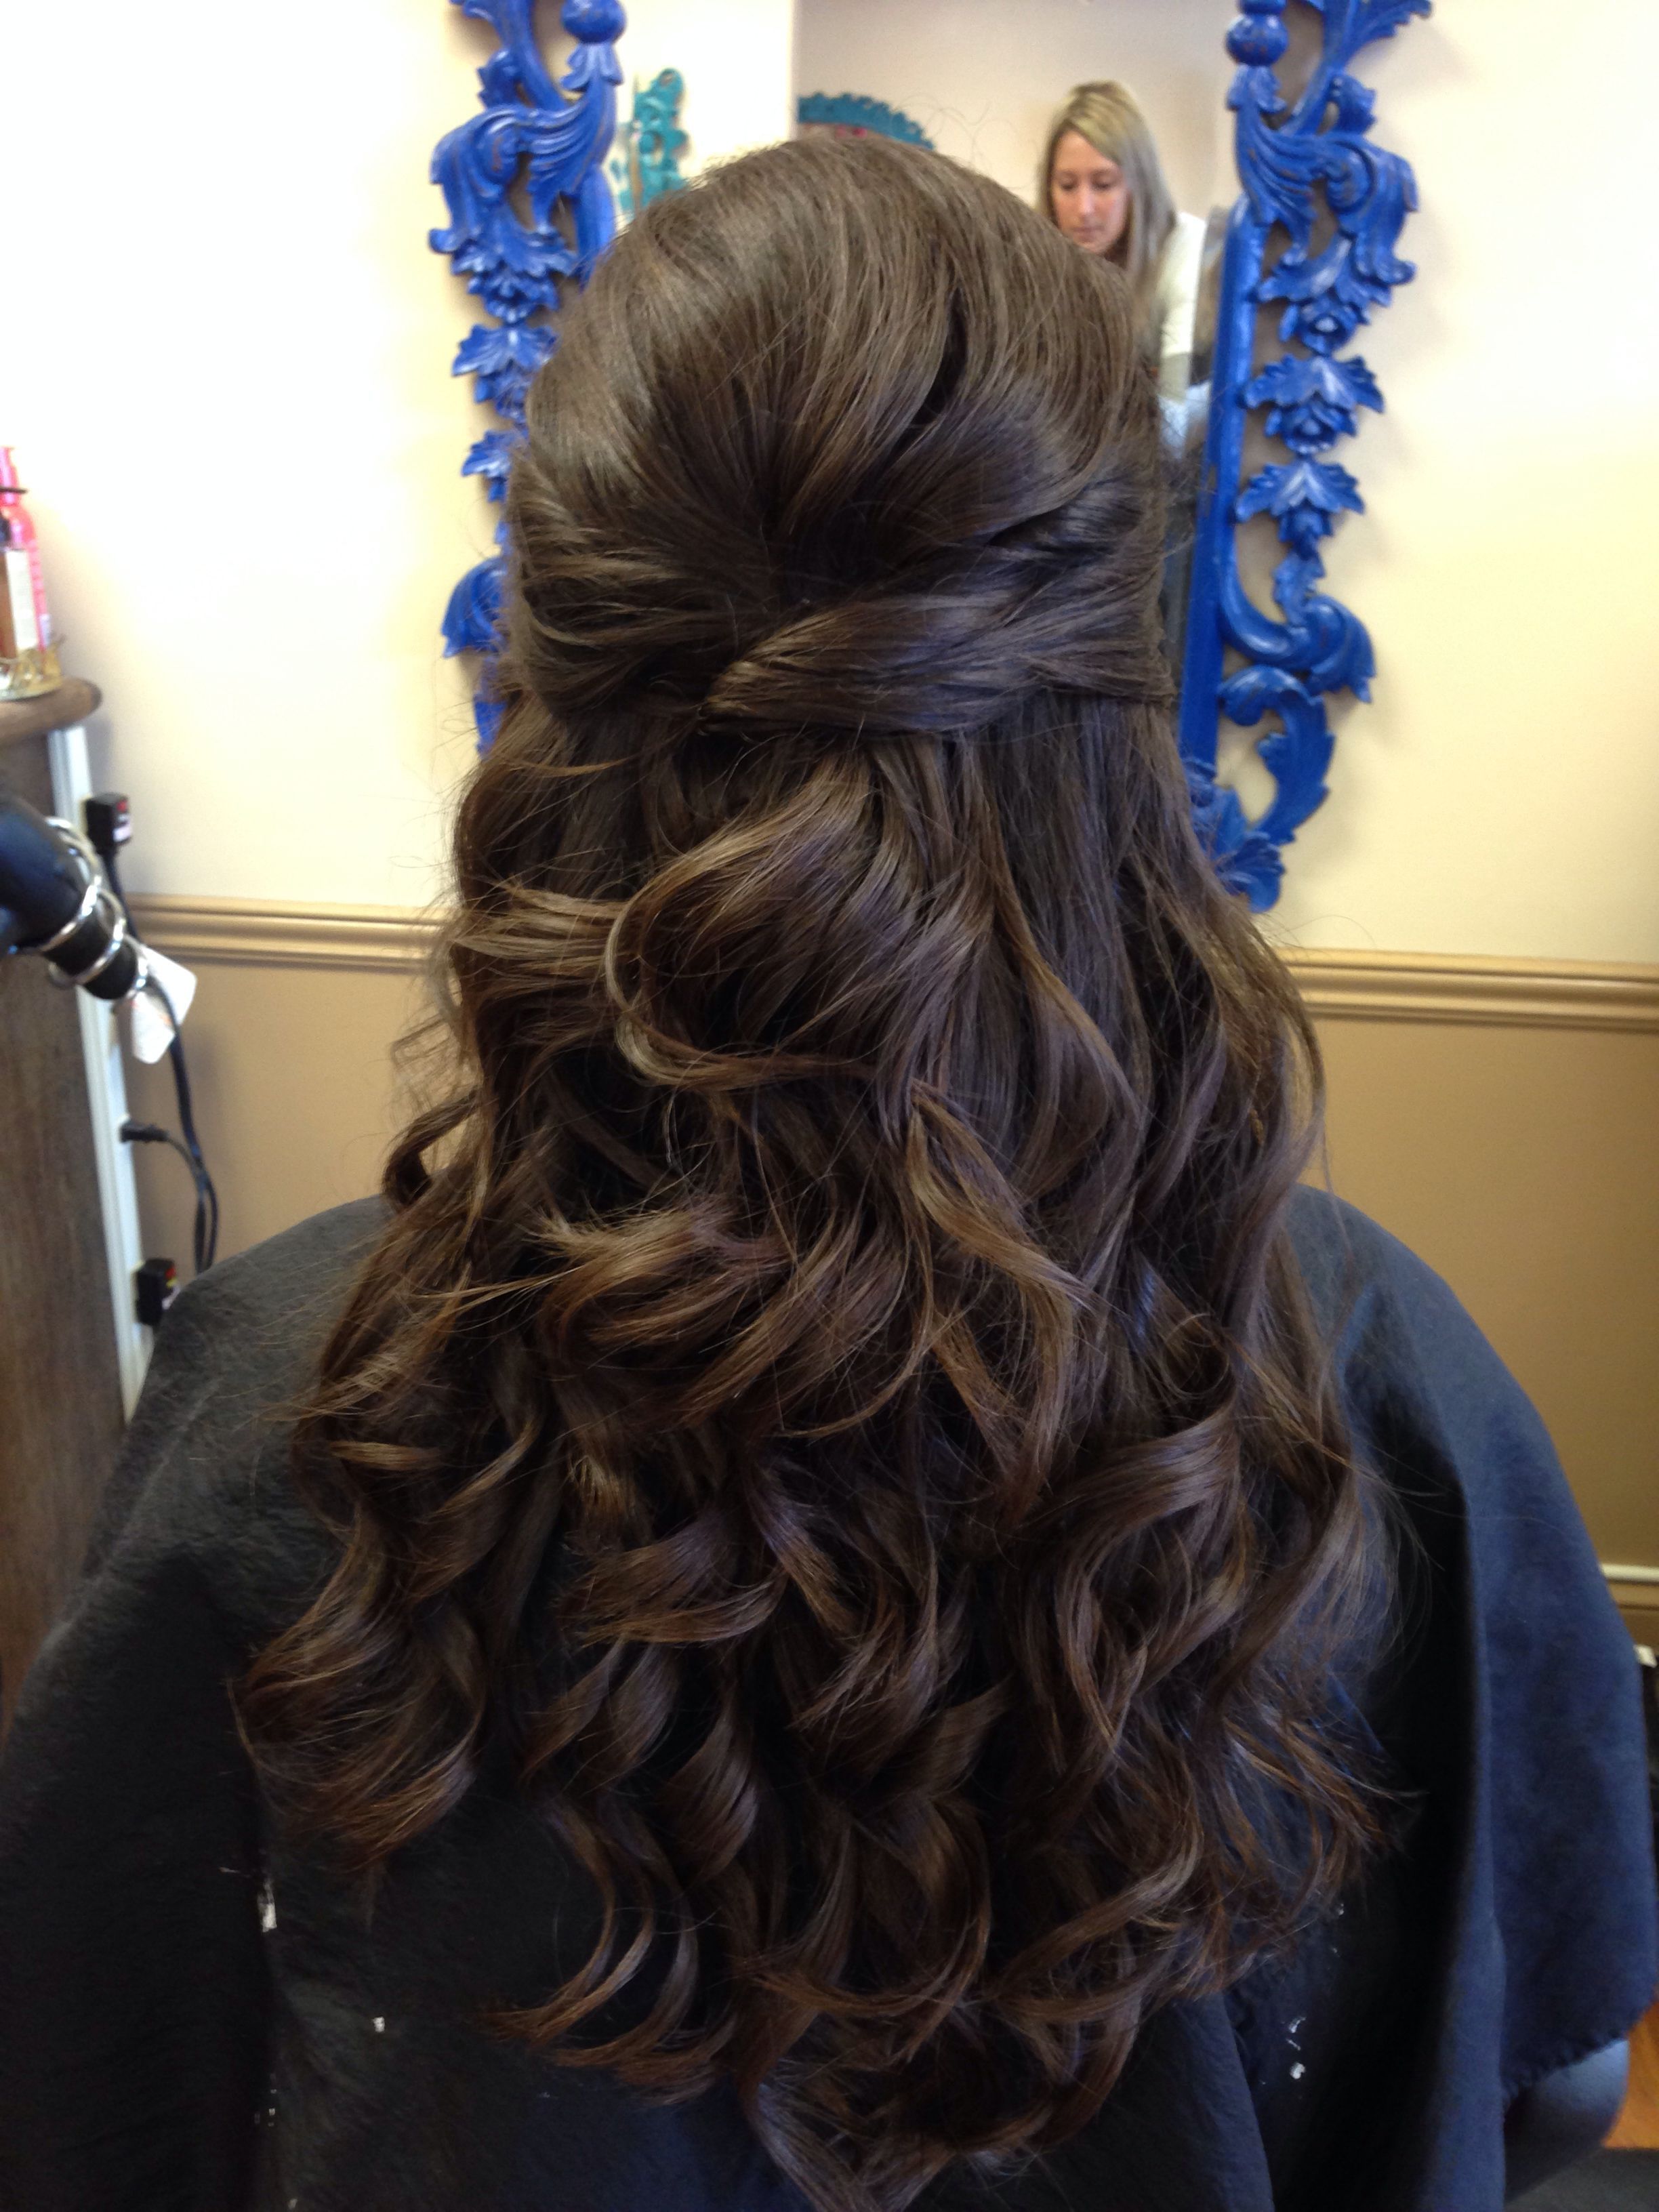 Current Twists And Curls In Bridal Half Up Bridal Hairstyles Inside Wedding Hair – Half Up, Curly, Brunette, Twist #wedding #hair (View 1 of 20)